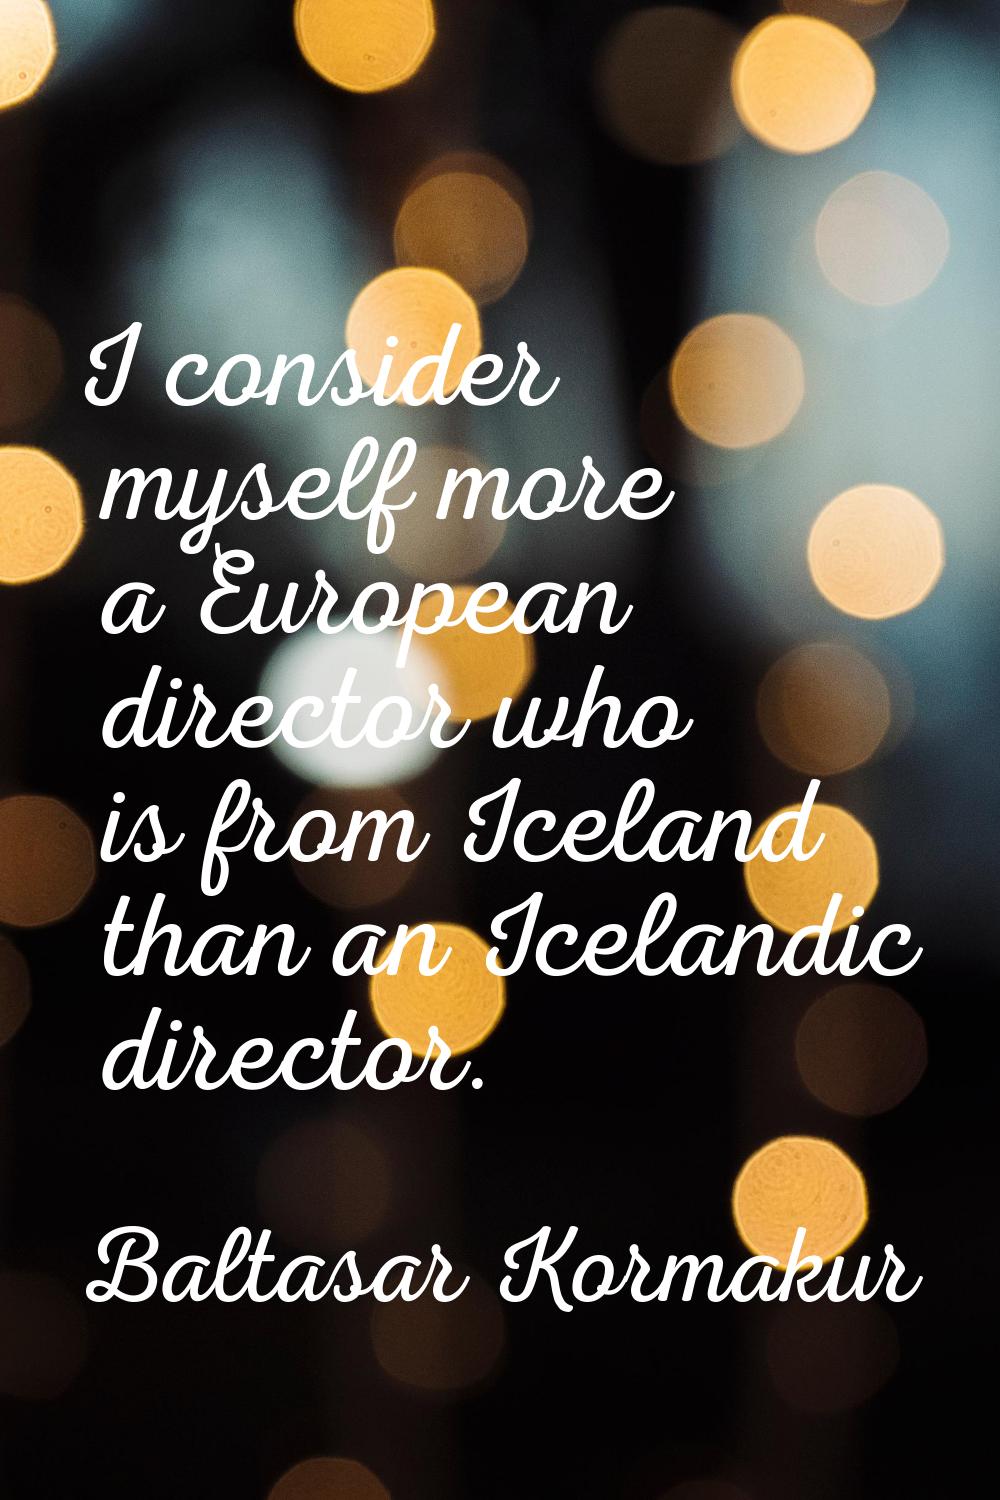 I consider myself more a European director who is from Iceland than an Icelandic director.